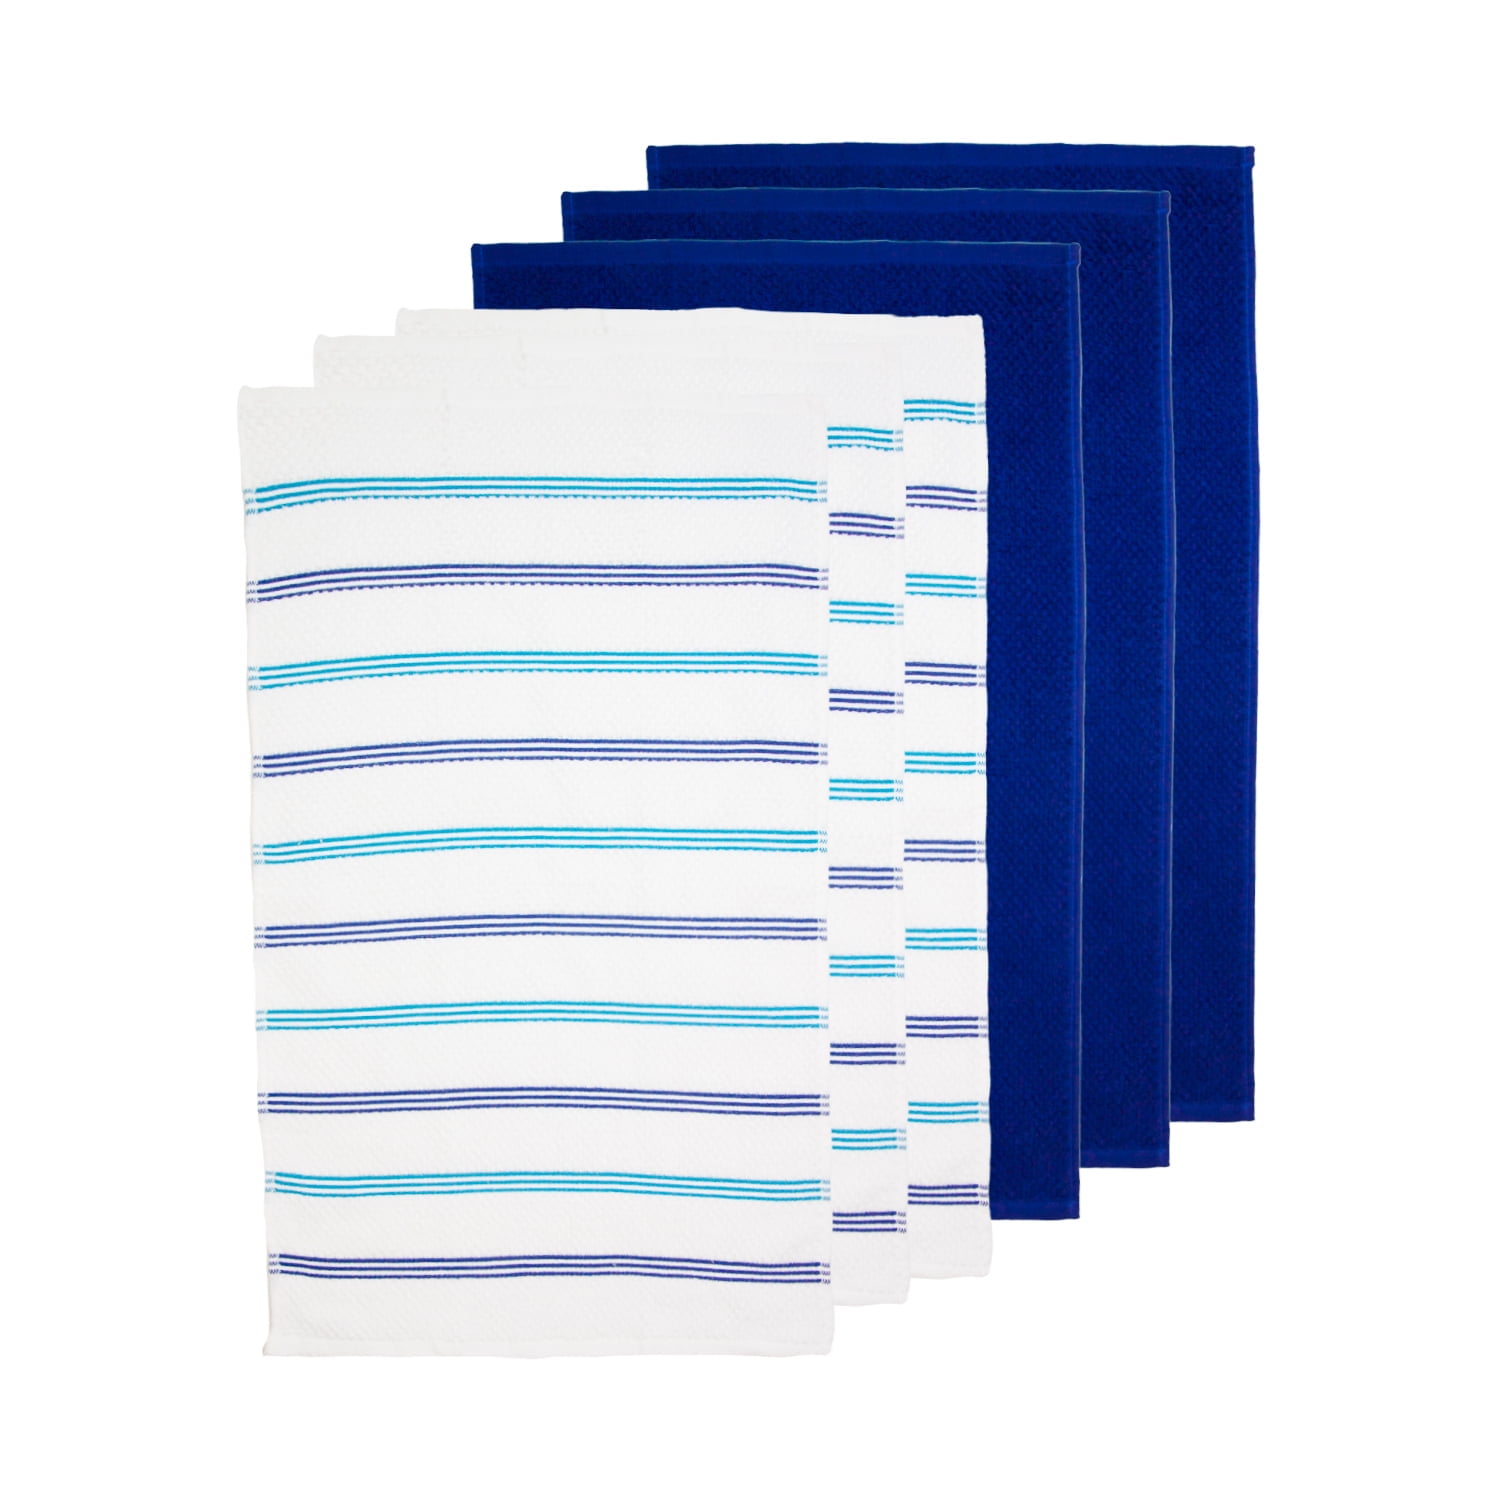 Sloppy Chef Premier Kitchen Towels (Pack of 6),15x25 in., Striped Pattern,  Blue, White & Navy, Cotton 